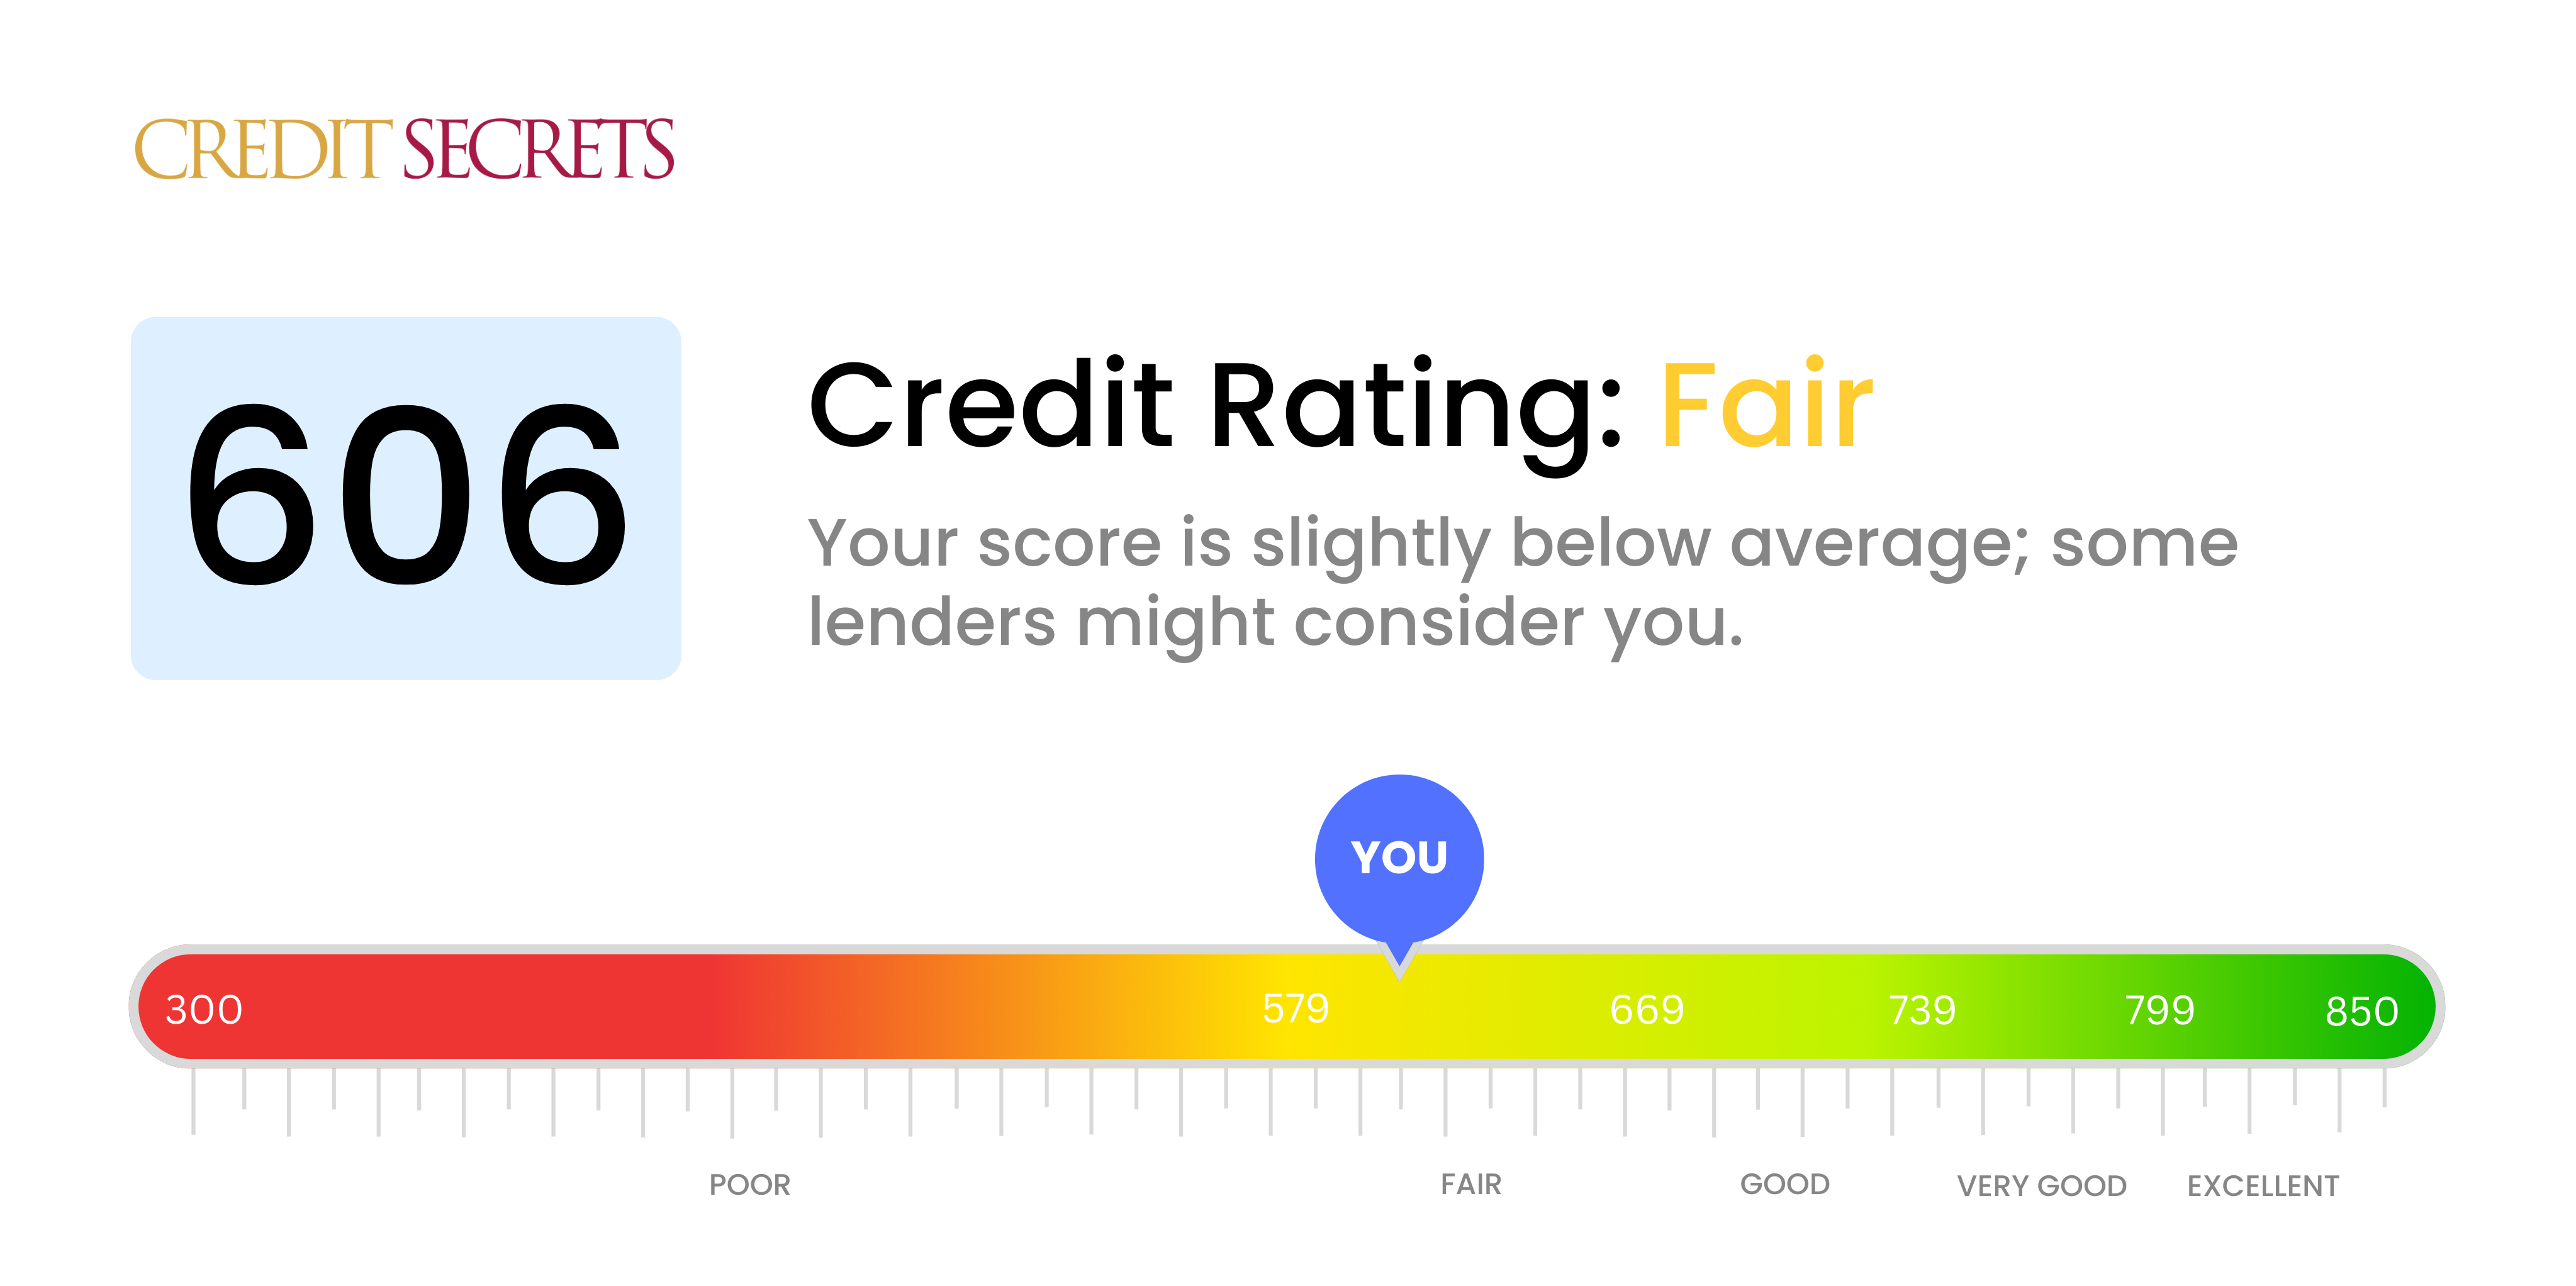 Is 606 a good credit score?